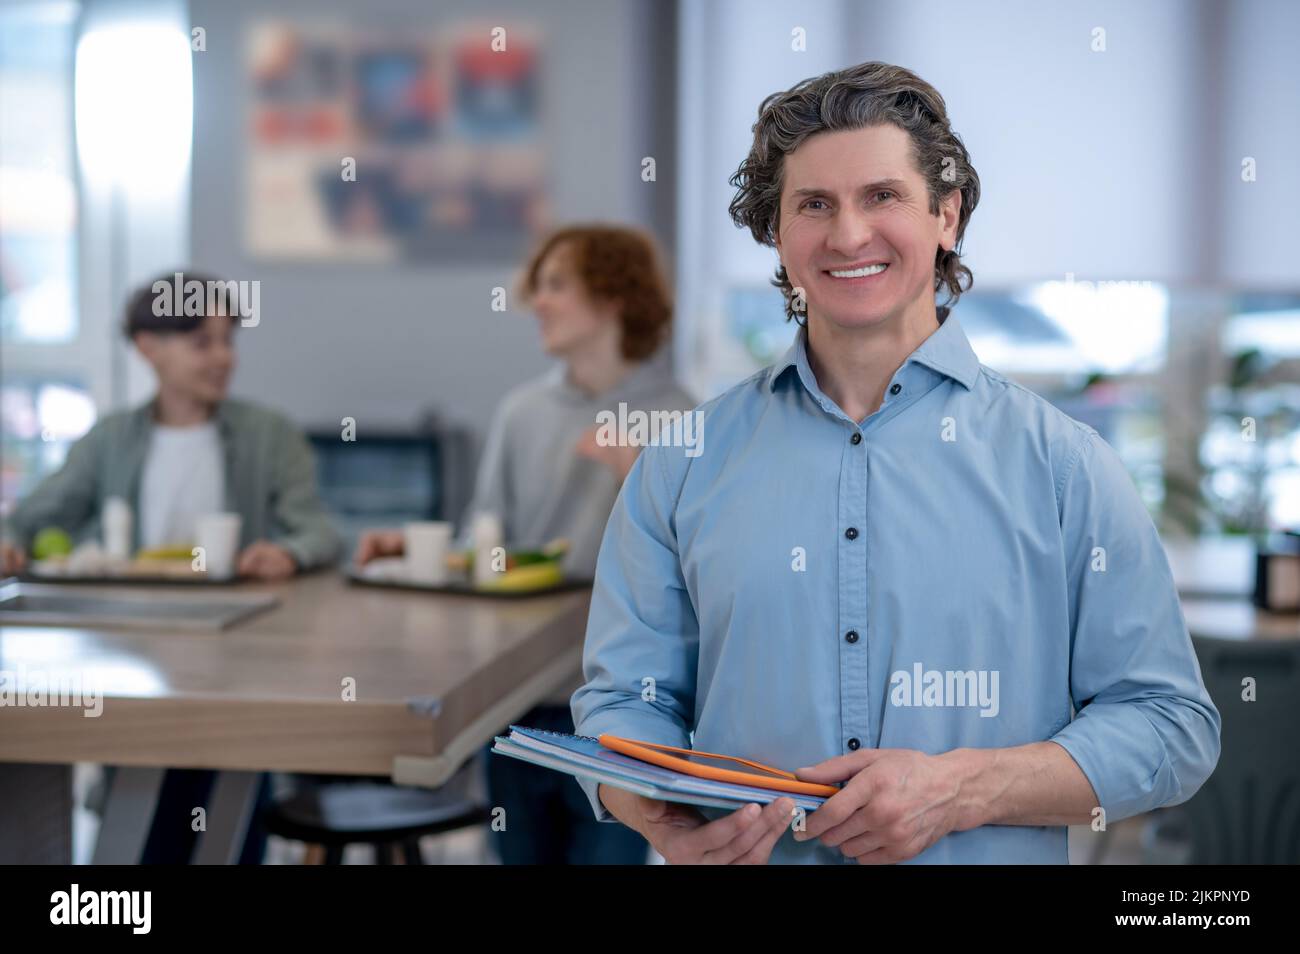 A smiling male teacher in a school canteen Stock Photo